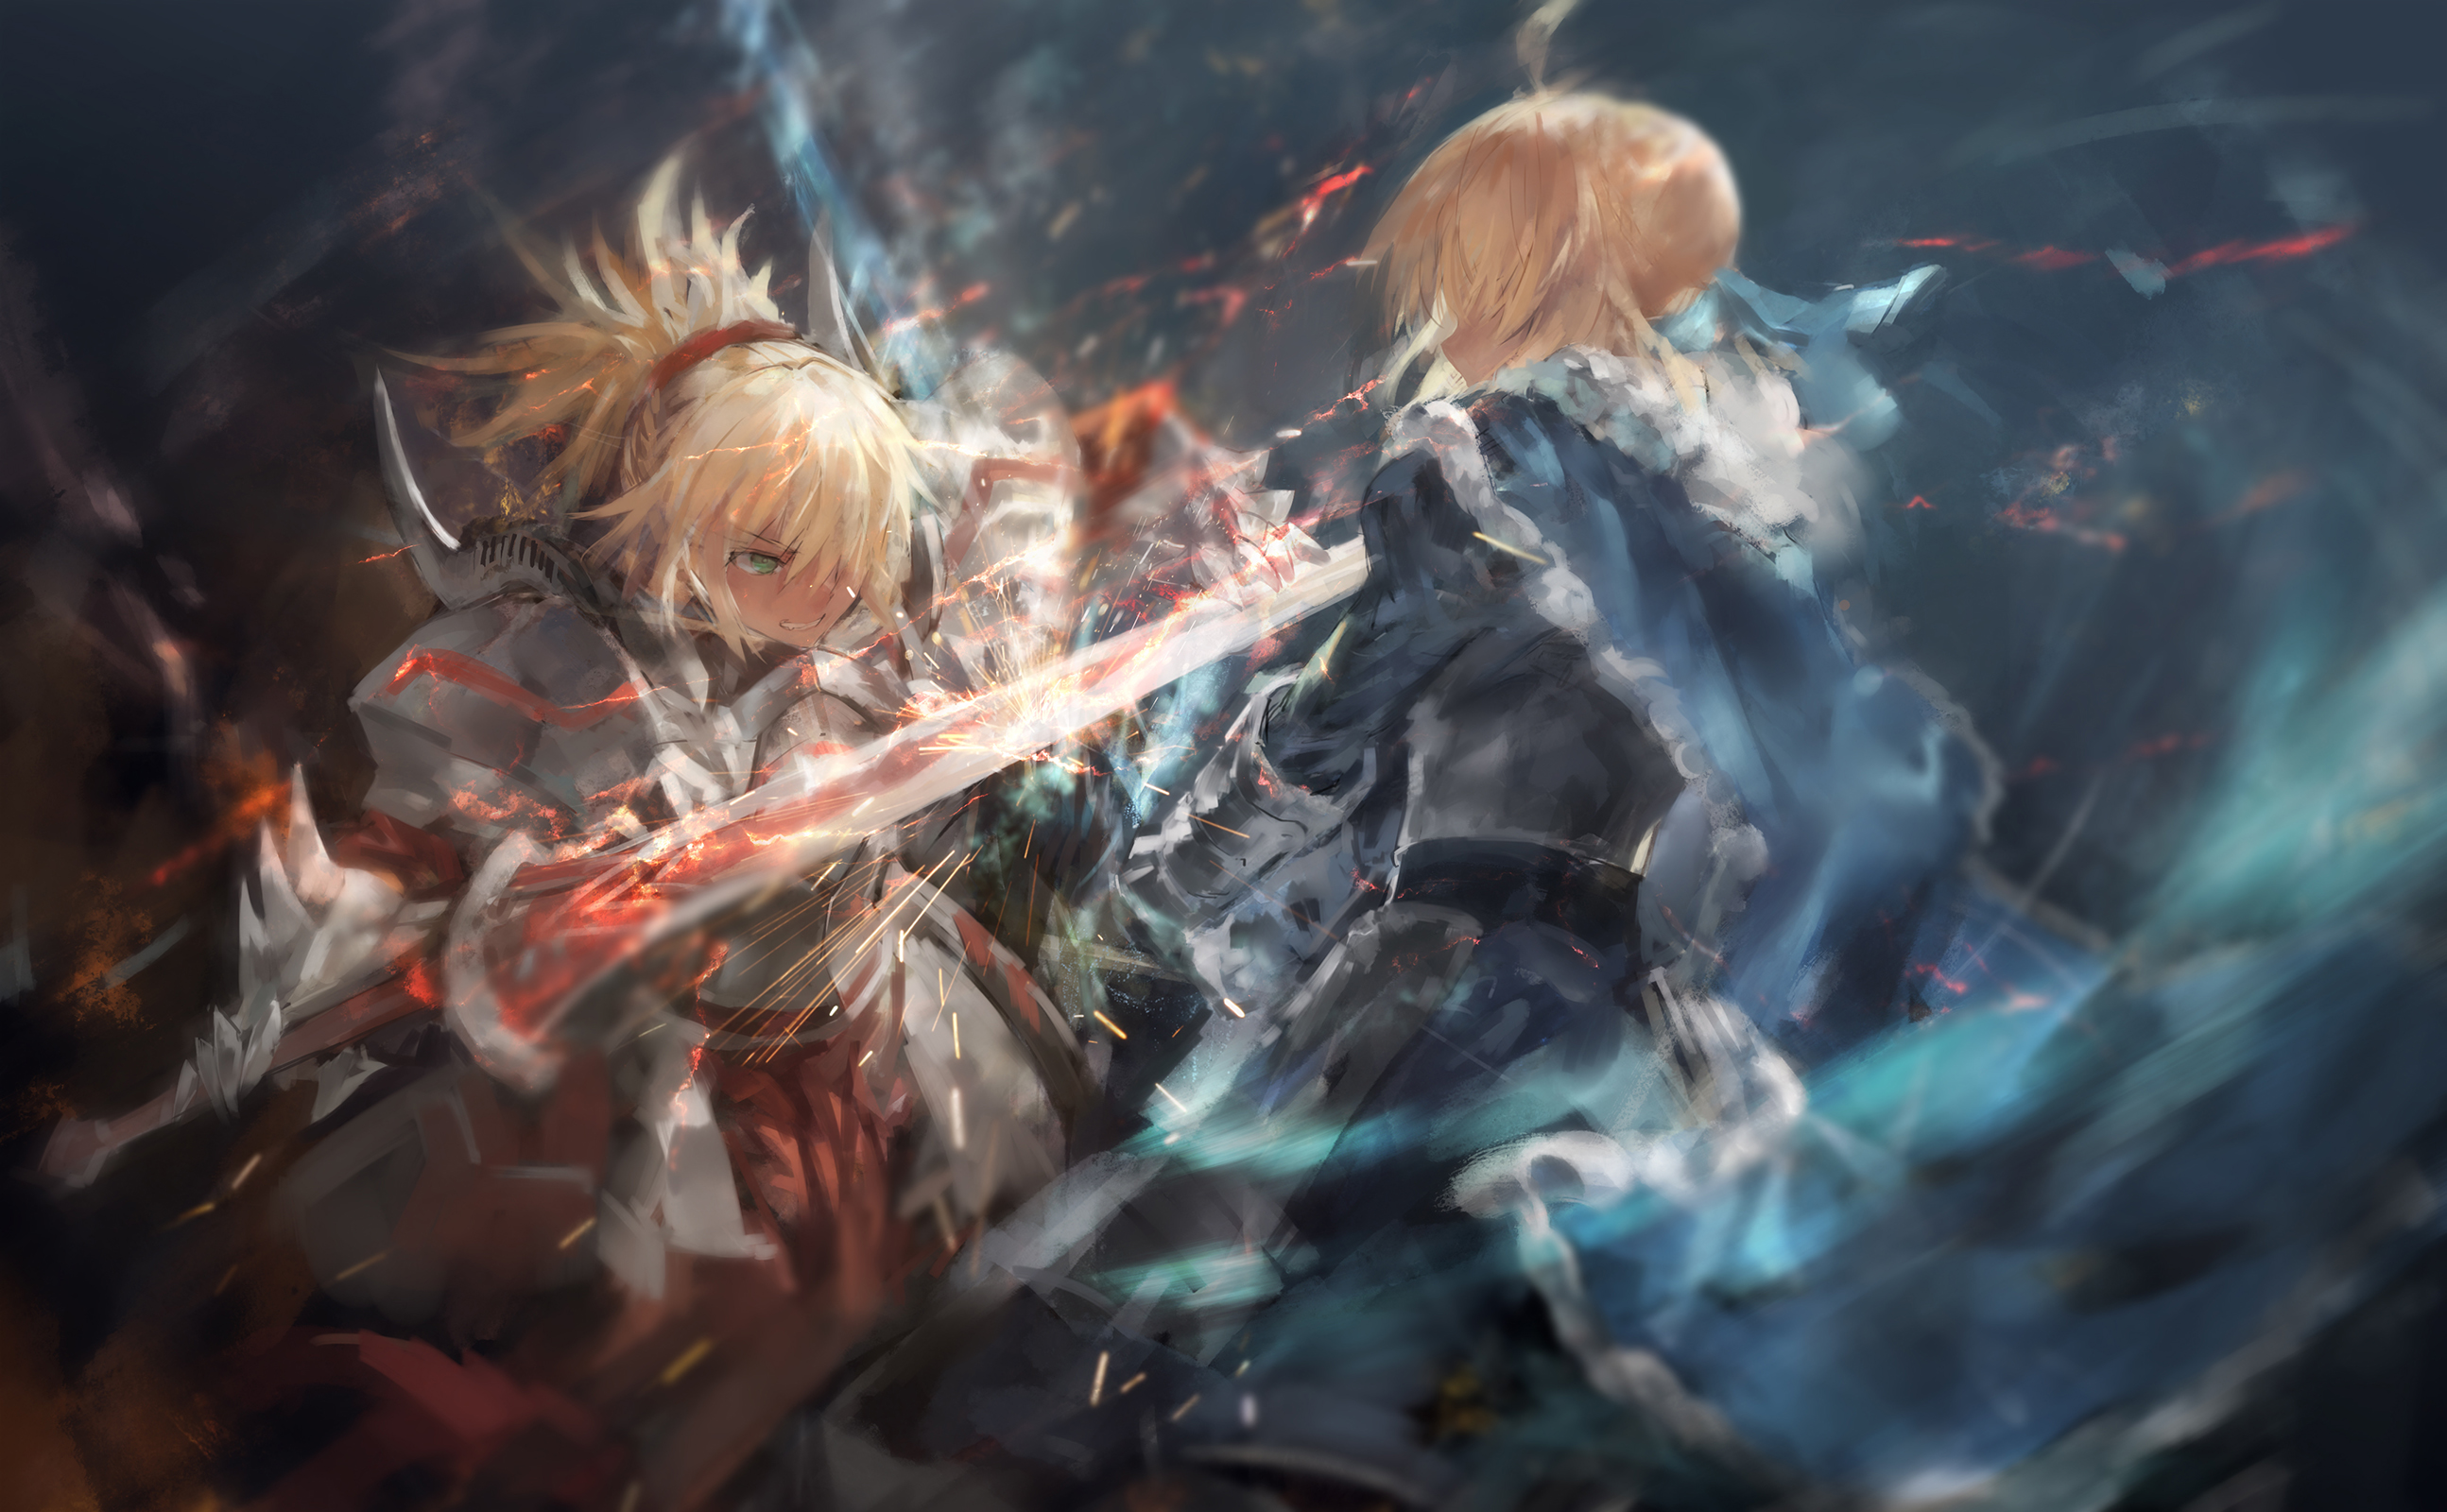 48x48 Saber Fate Apocrypha Ipad Air Hd 4k Wallpapers Images Backgrounds Photos And Pictures